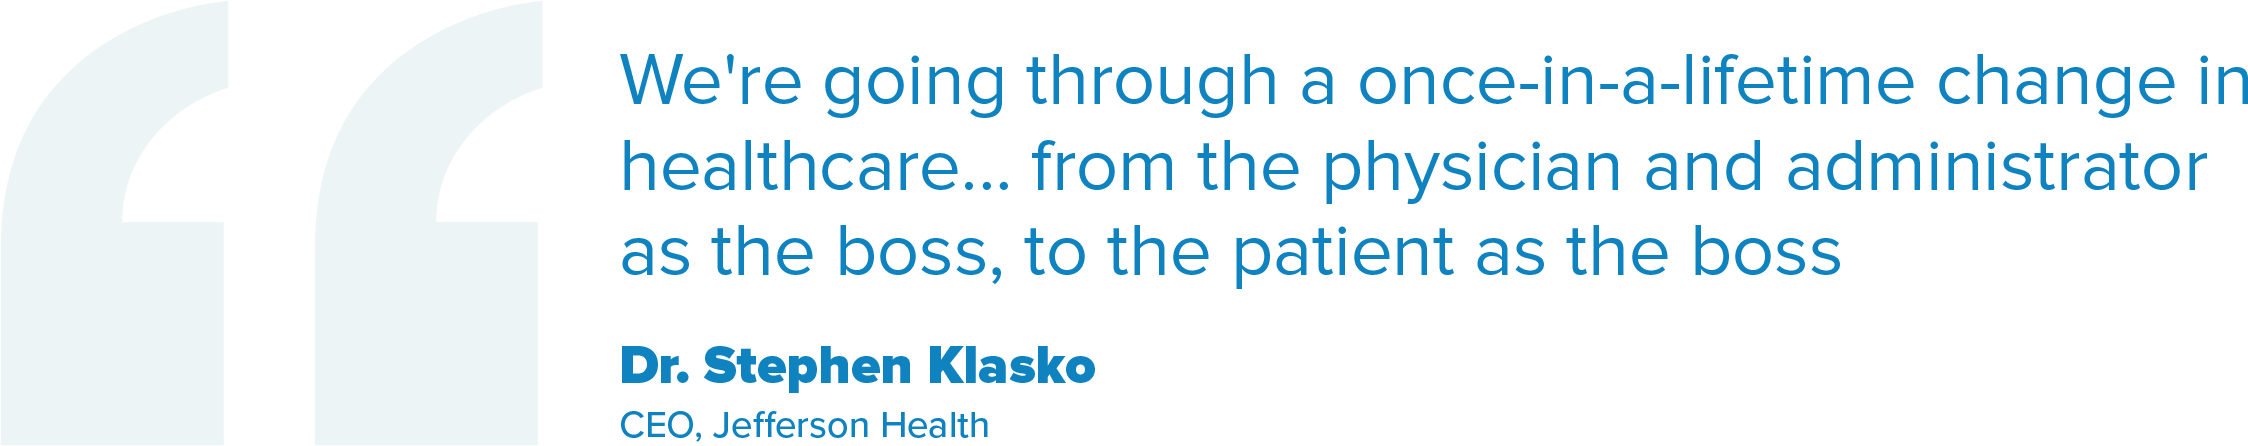 We're going through a once-in-a-lifetime change in healthcare... from the physician and administrator as the boss, to the patient as the boss - Dr. Stephen Klasko